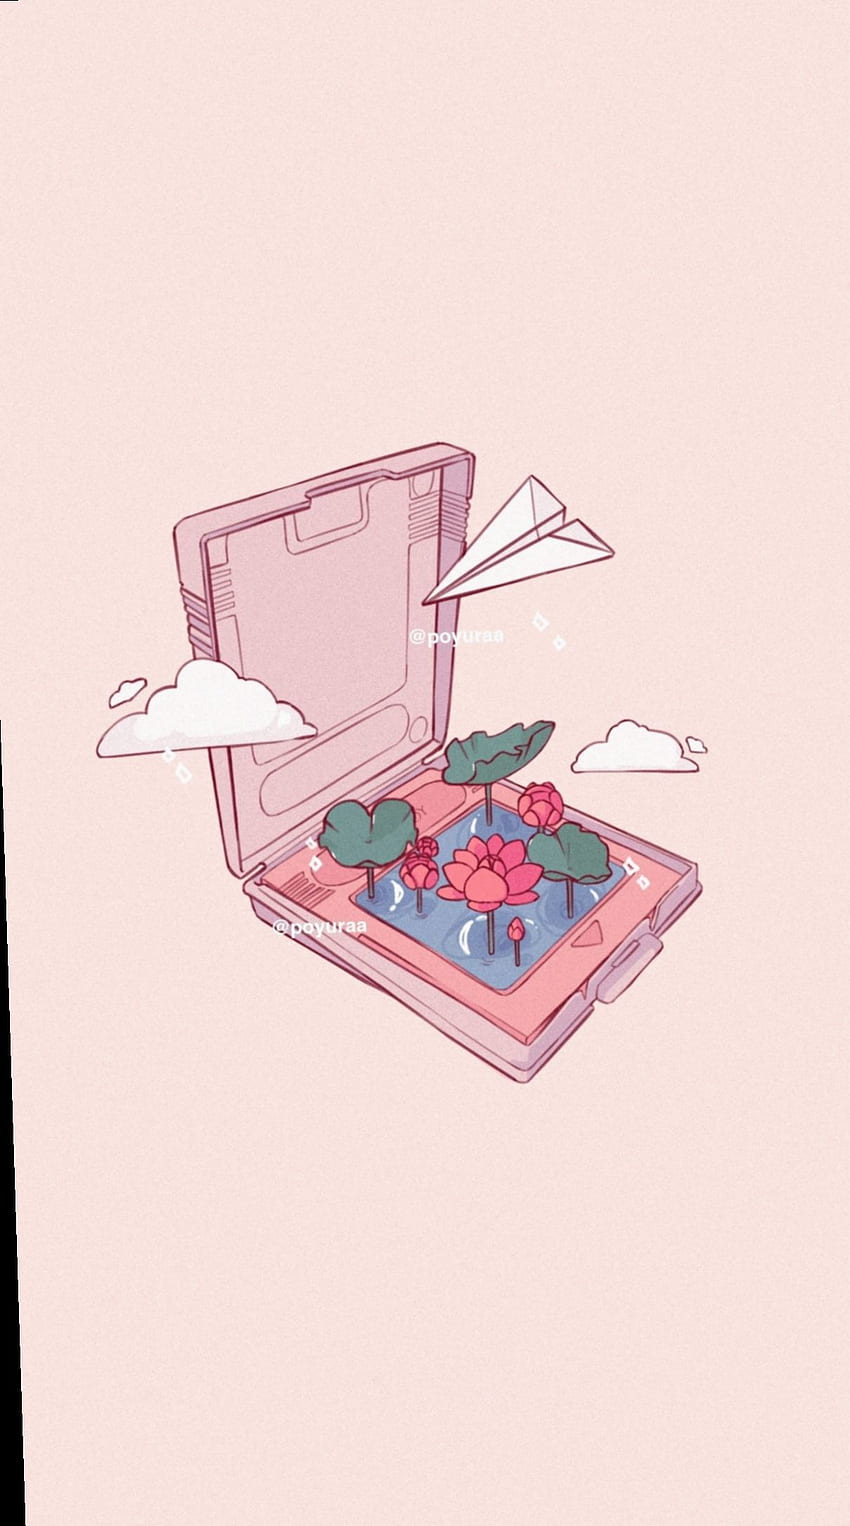 A laptop with flowers and planes on it - Nintendo